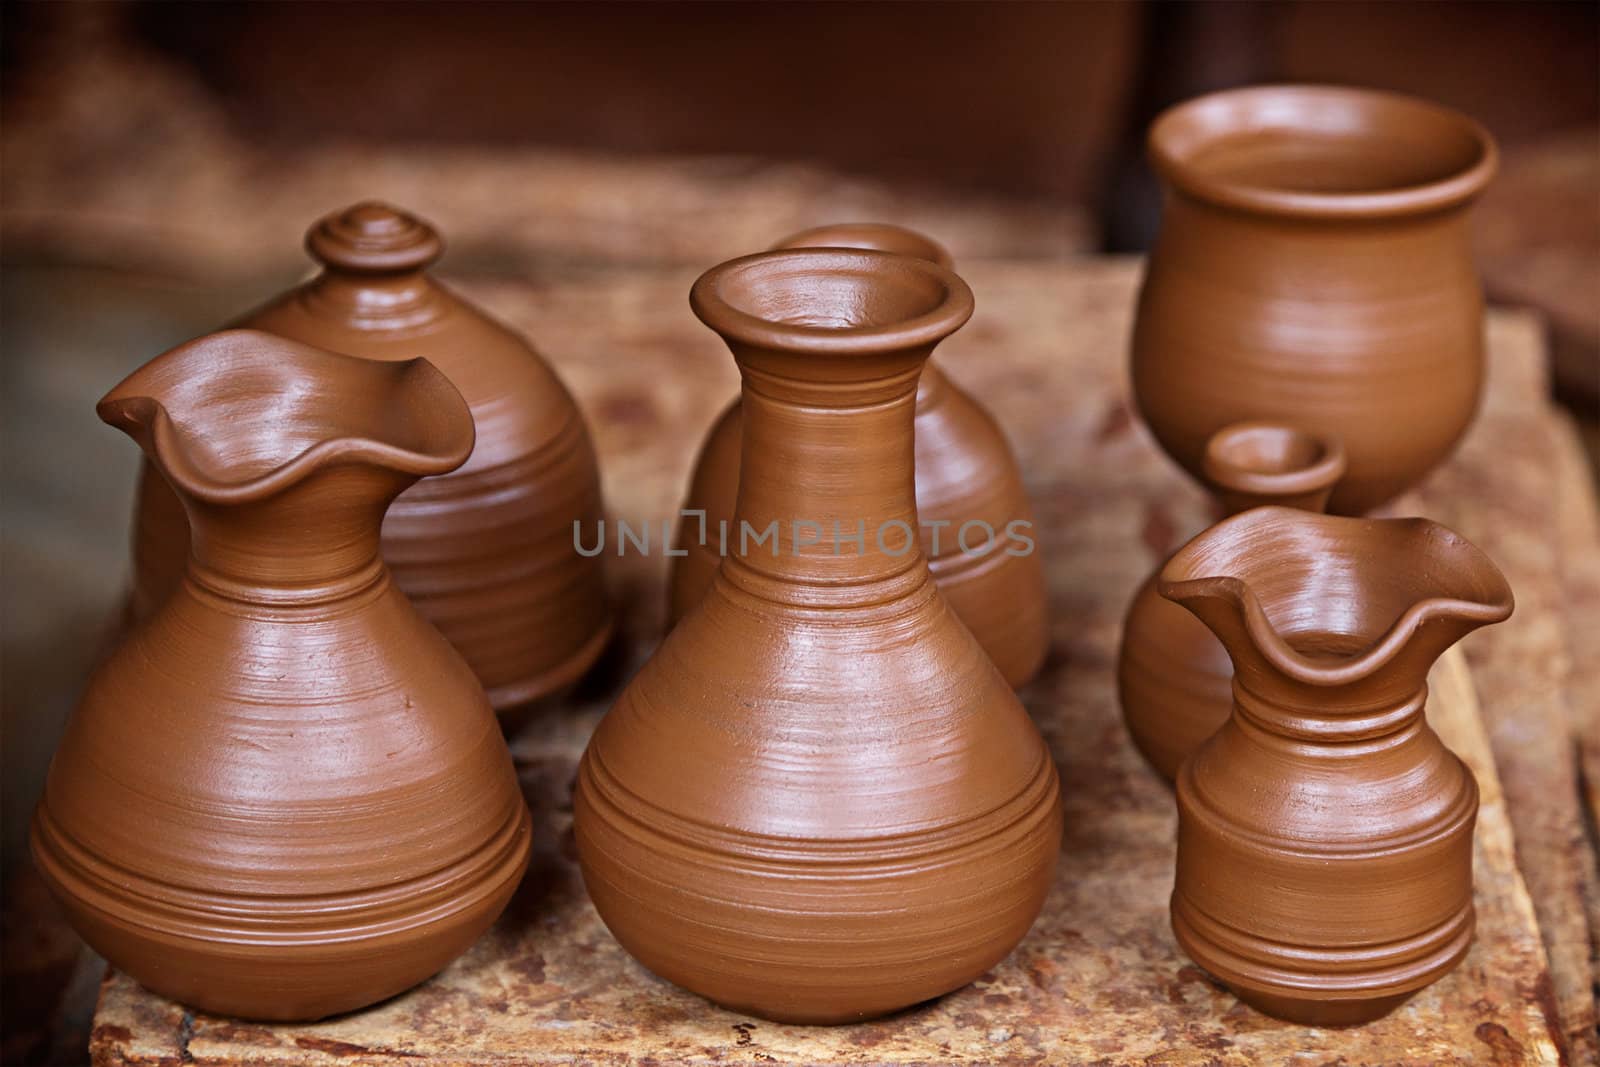 Pottery by dimol